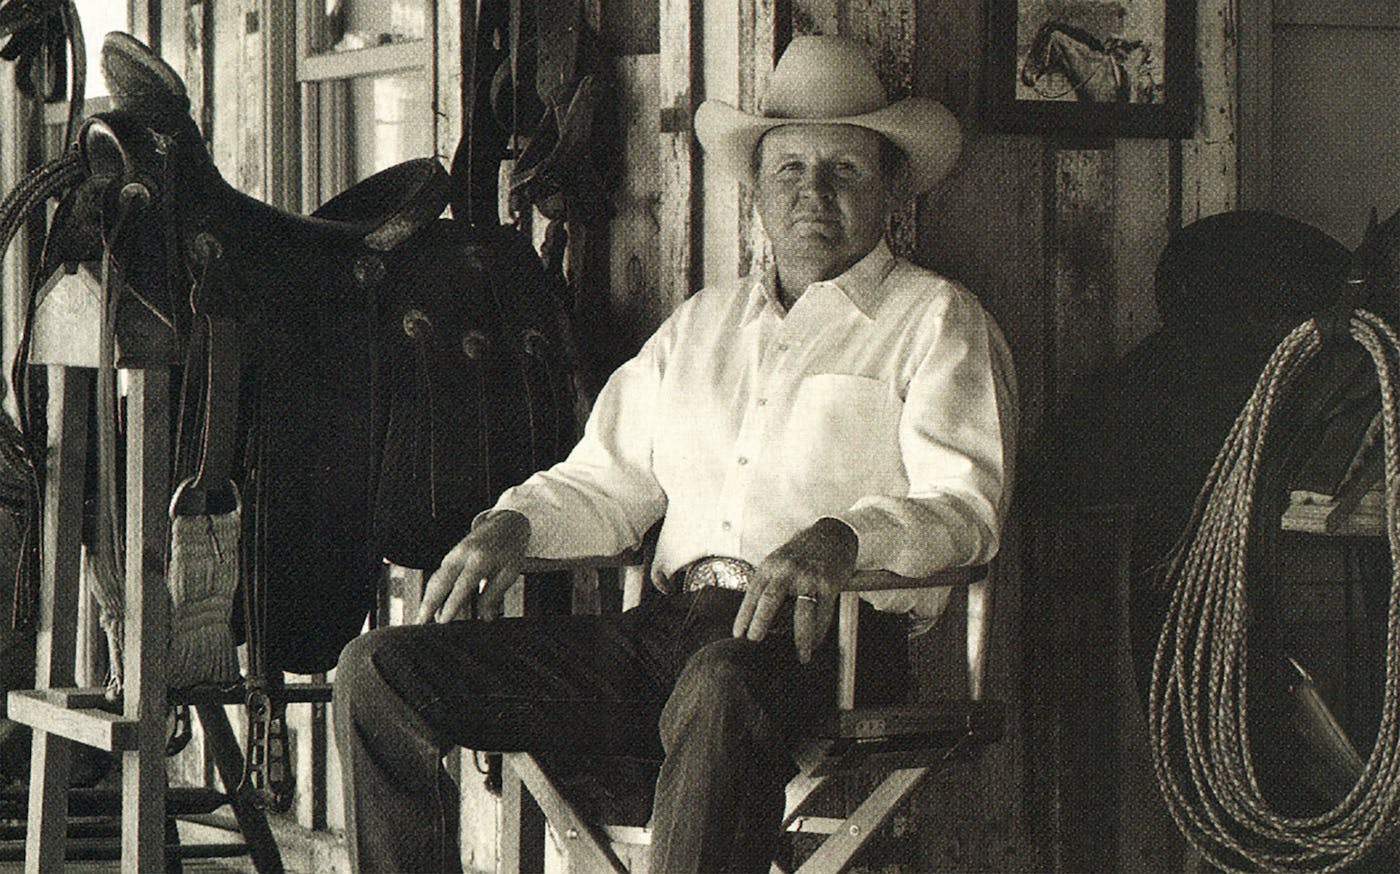 Buster Welch training a horse to cut cattle] - The Portal to Texas History